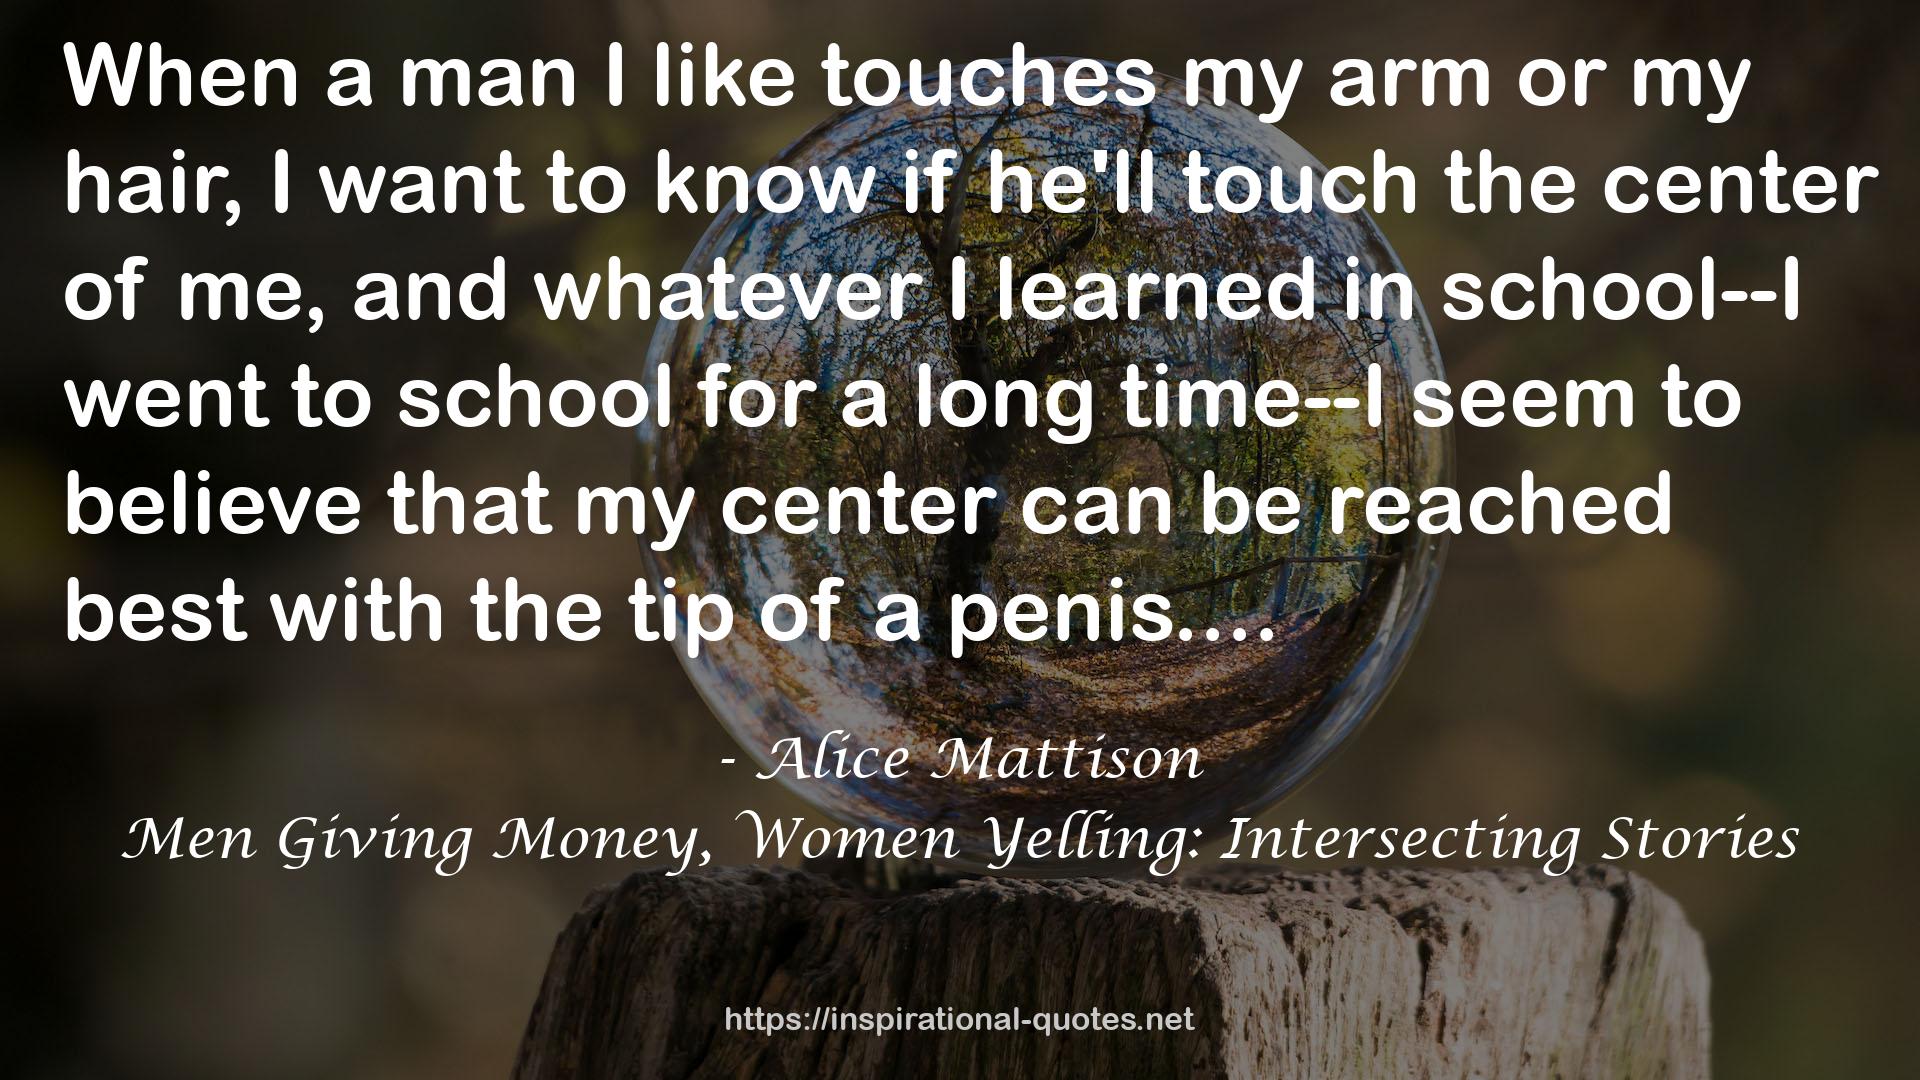 Men Giving Money, Women Yelling: Intersecting Stories QUOTES